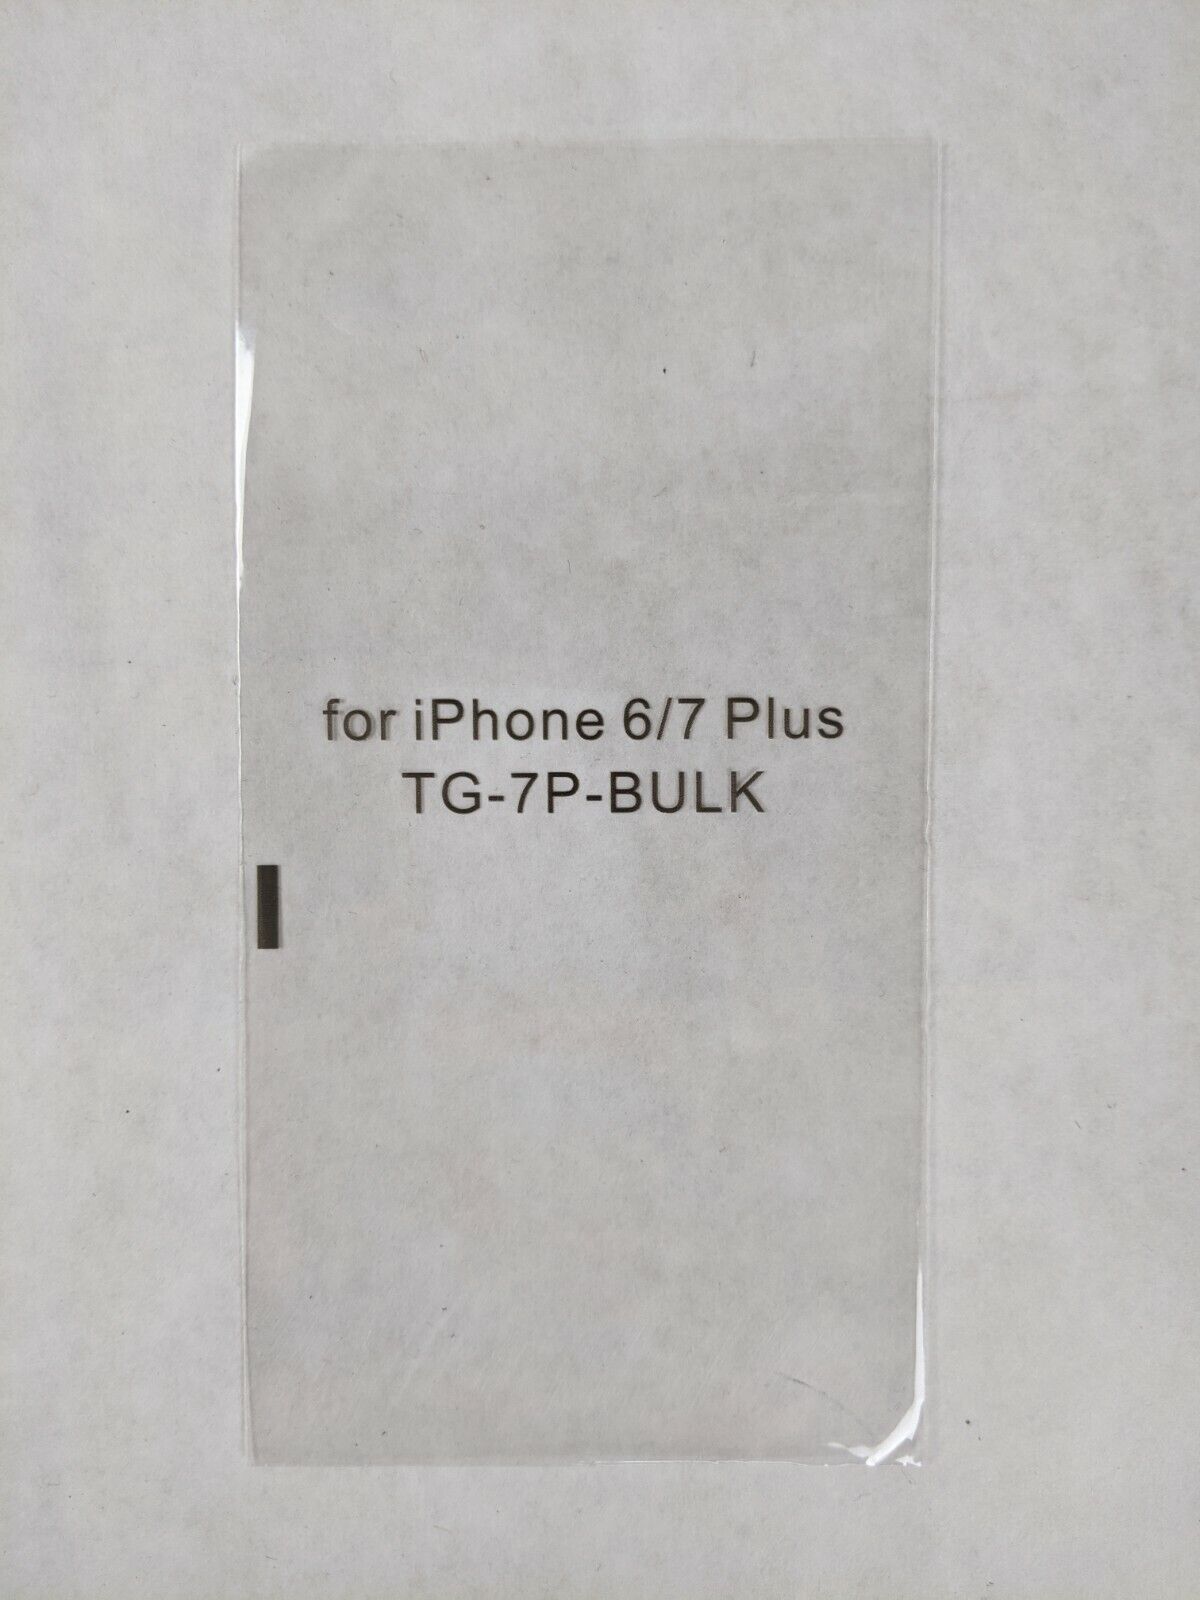 Unbranded Screen Protector for iPhone 6/7 Plus TG-7P-BULK 6+, 7+